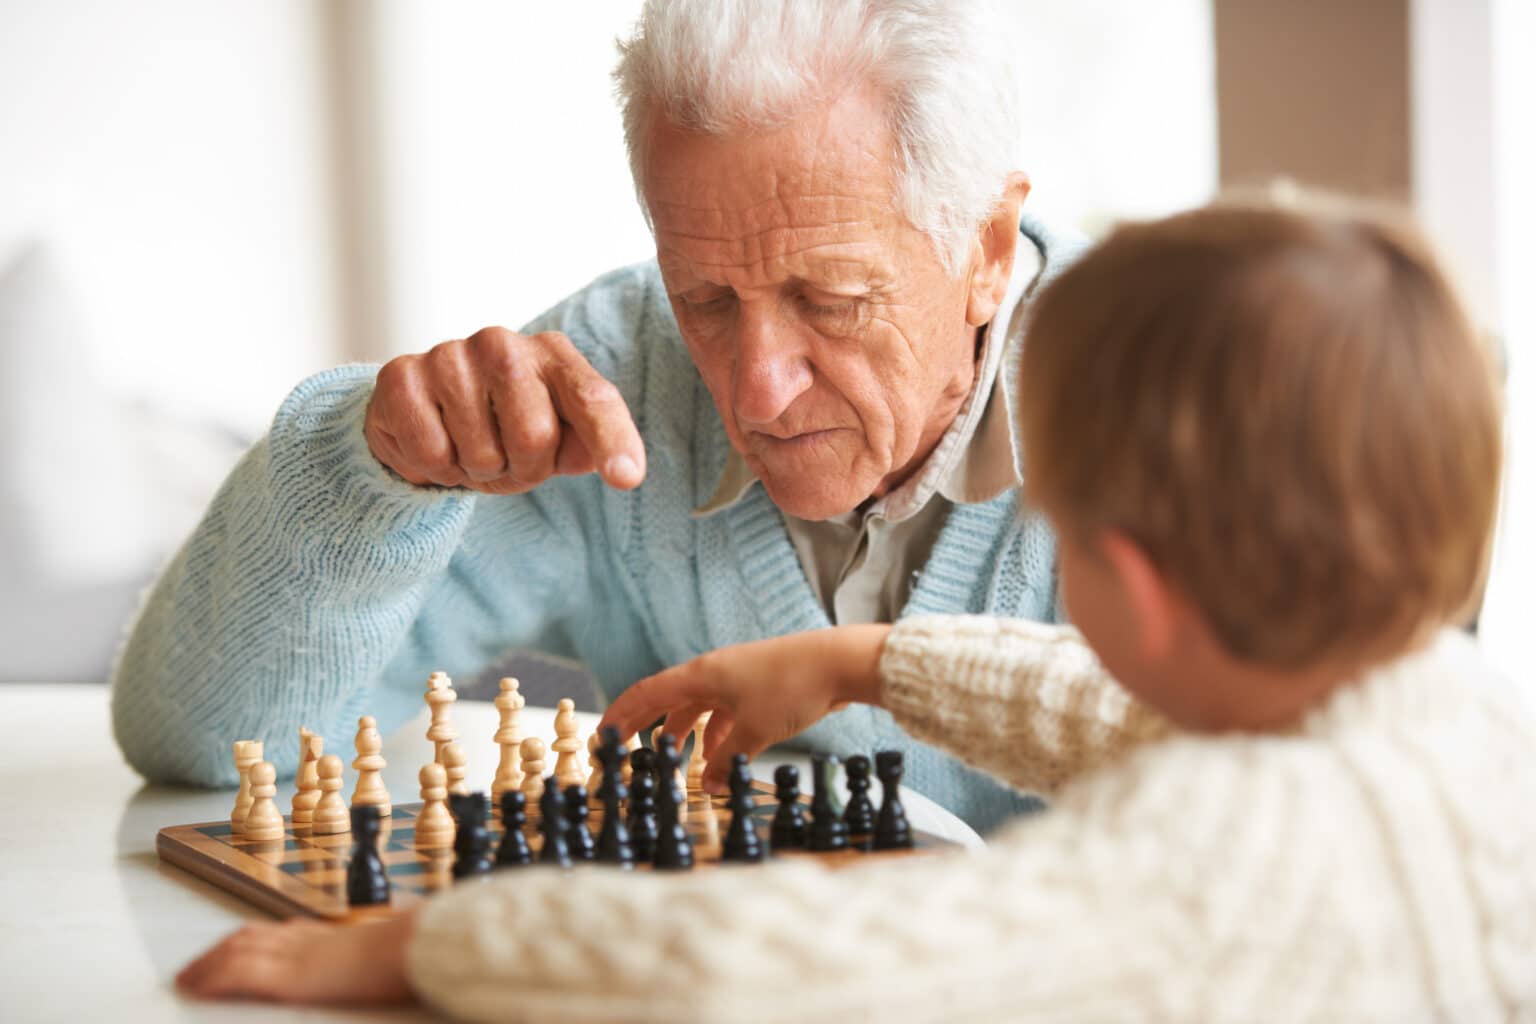 A grandfather teaching his grandson how to play chess